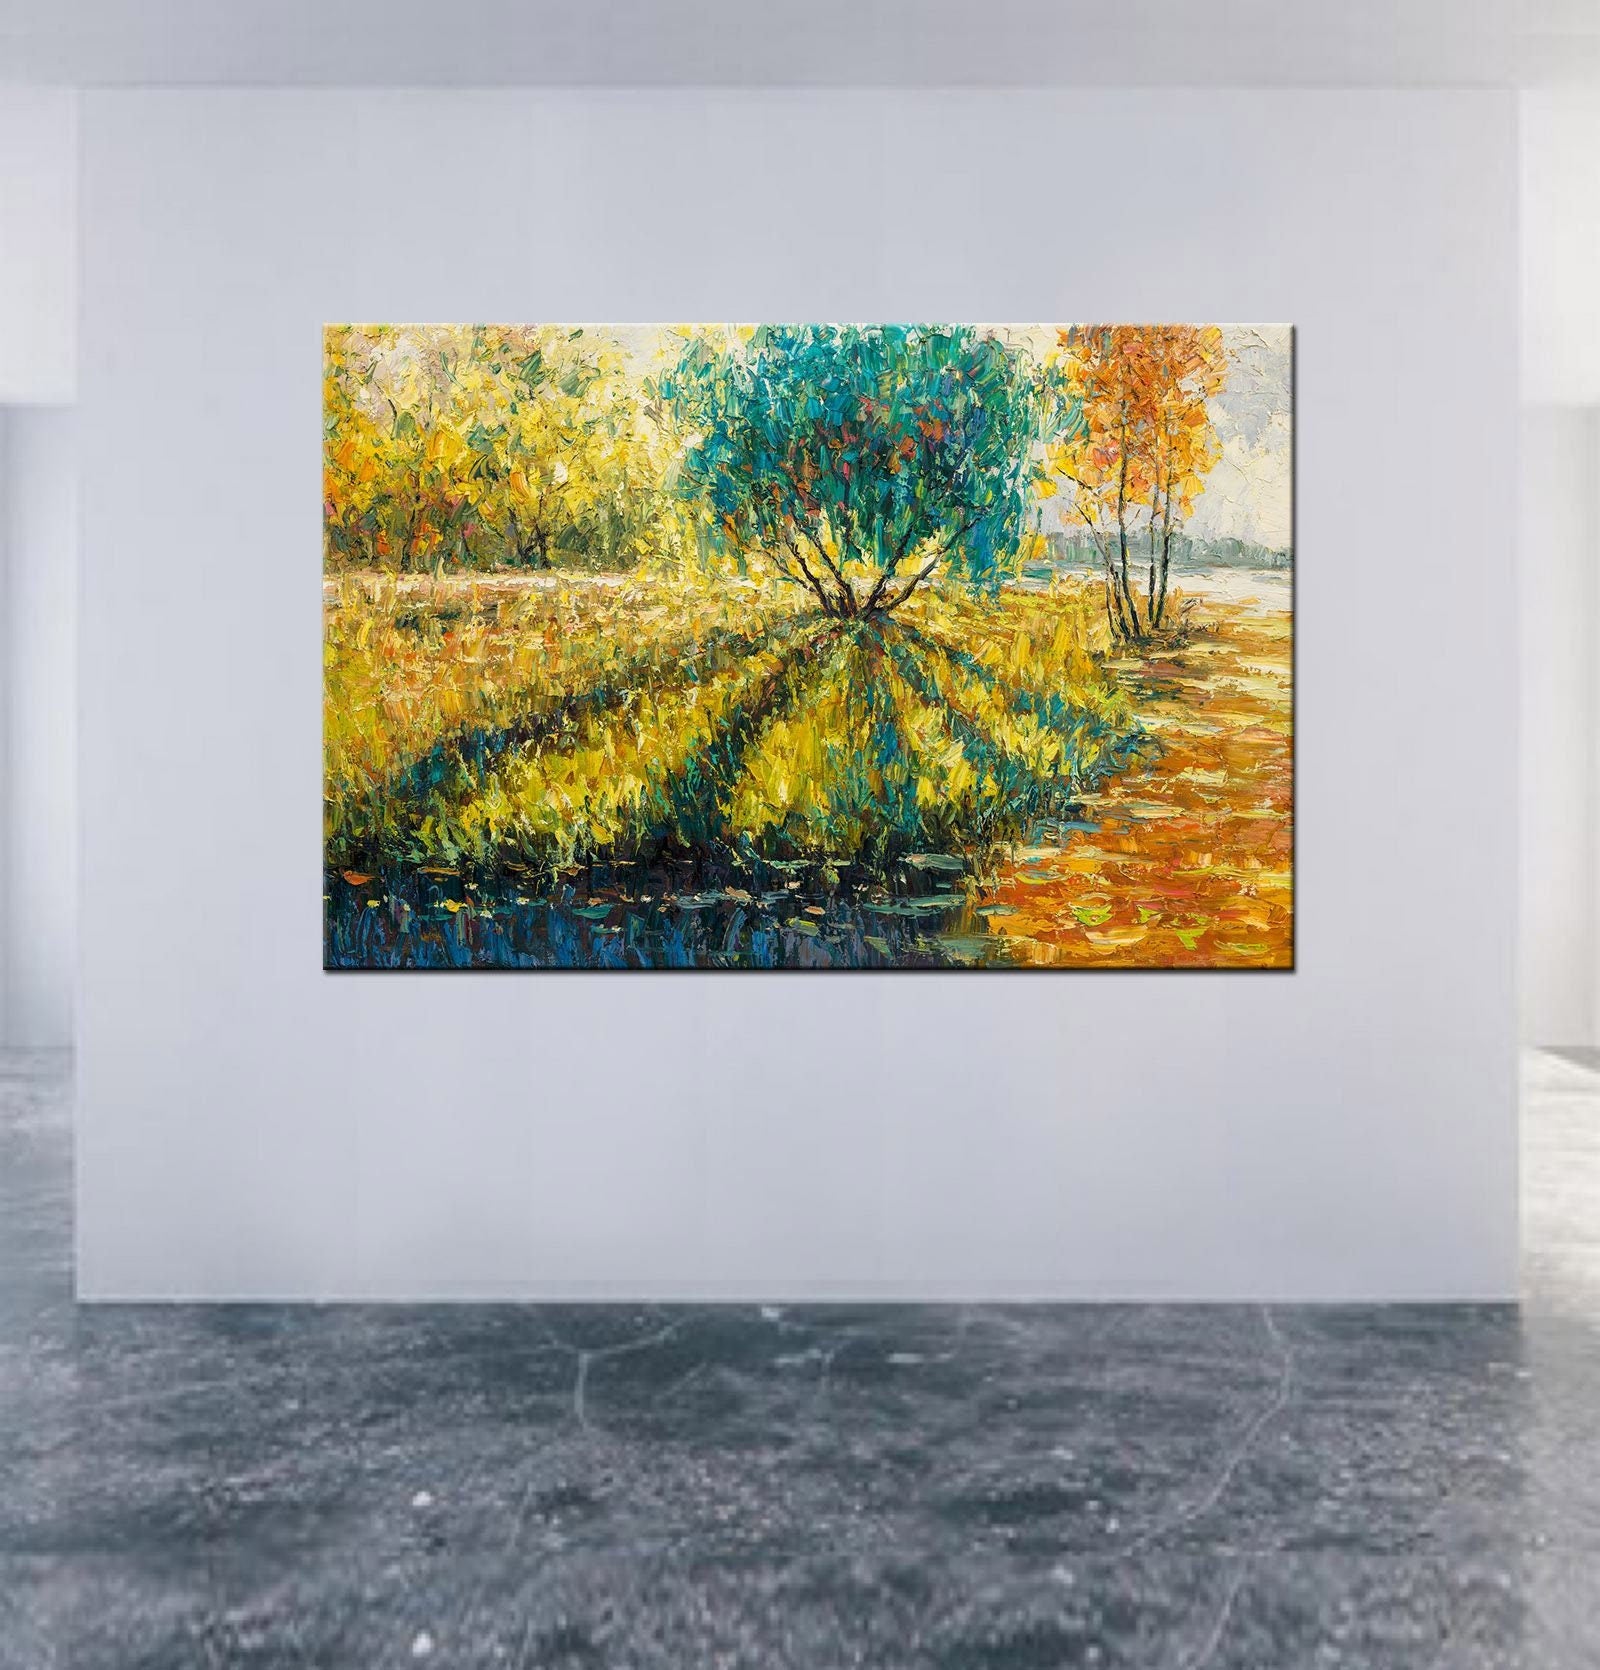 Modern Art, Abstract Canvas Art, Oil Painting Landscape Spring Fields by the Lake, Beach Painting, Large Canvas Art, Oil Painting Landscape